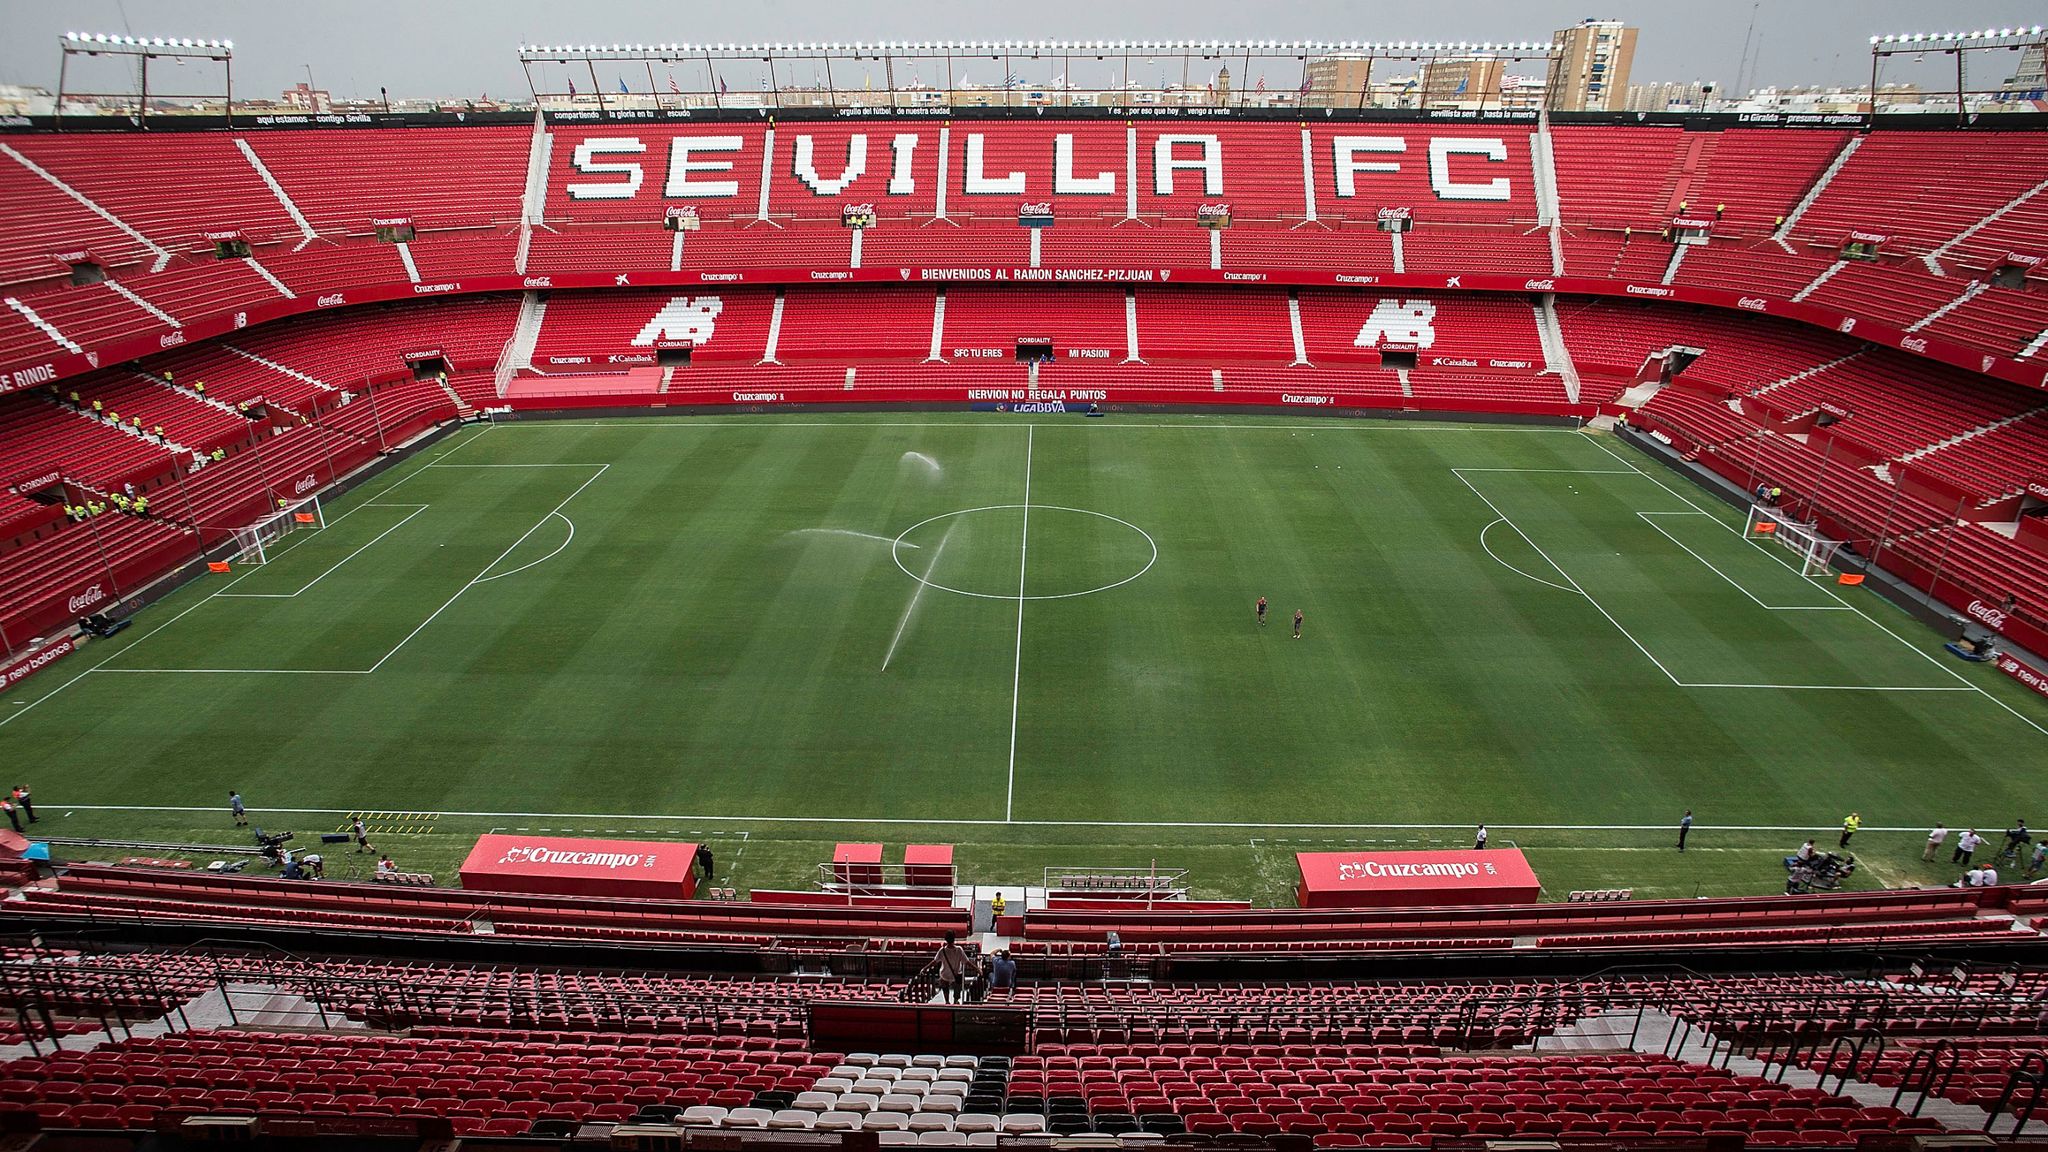 Sevilla within rules charging up to £133 for Manchester United